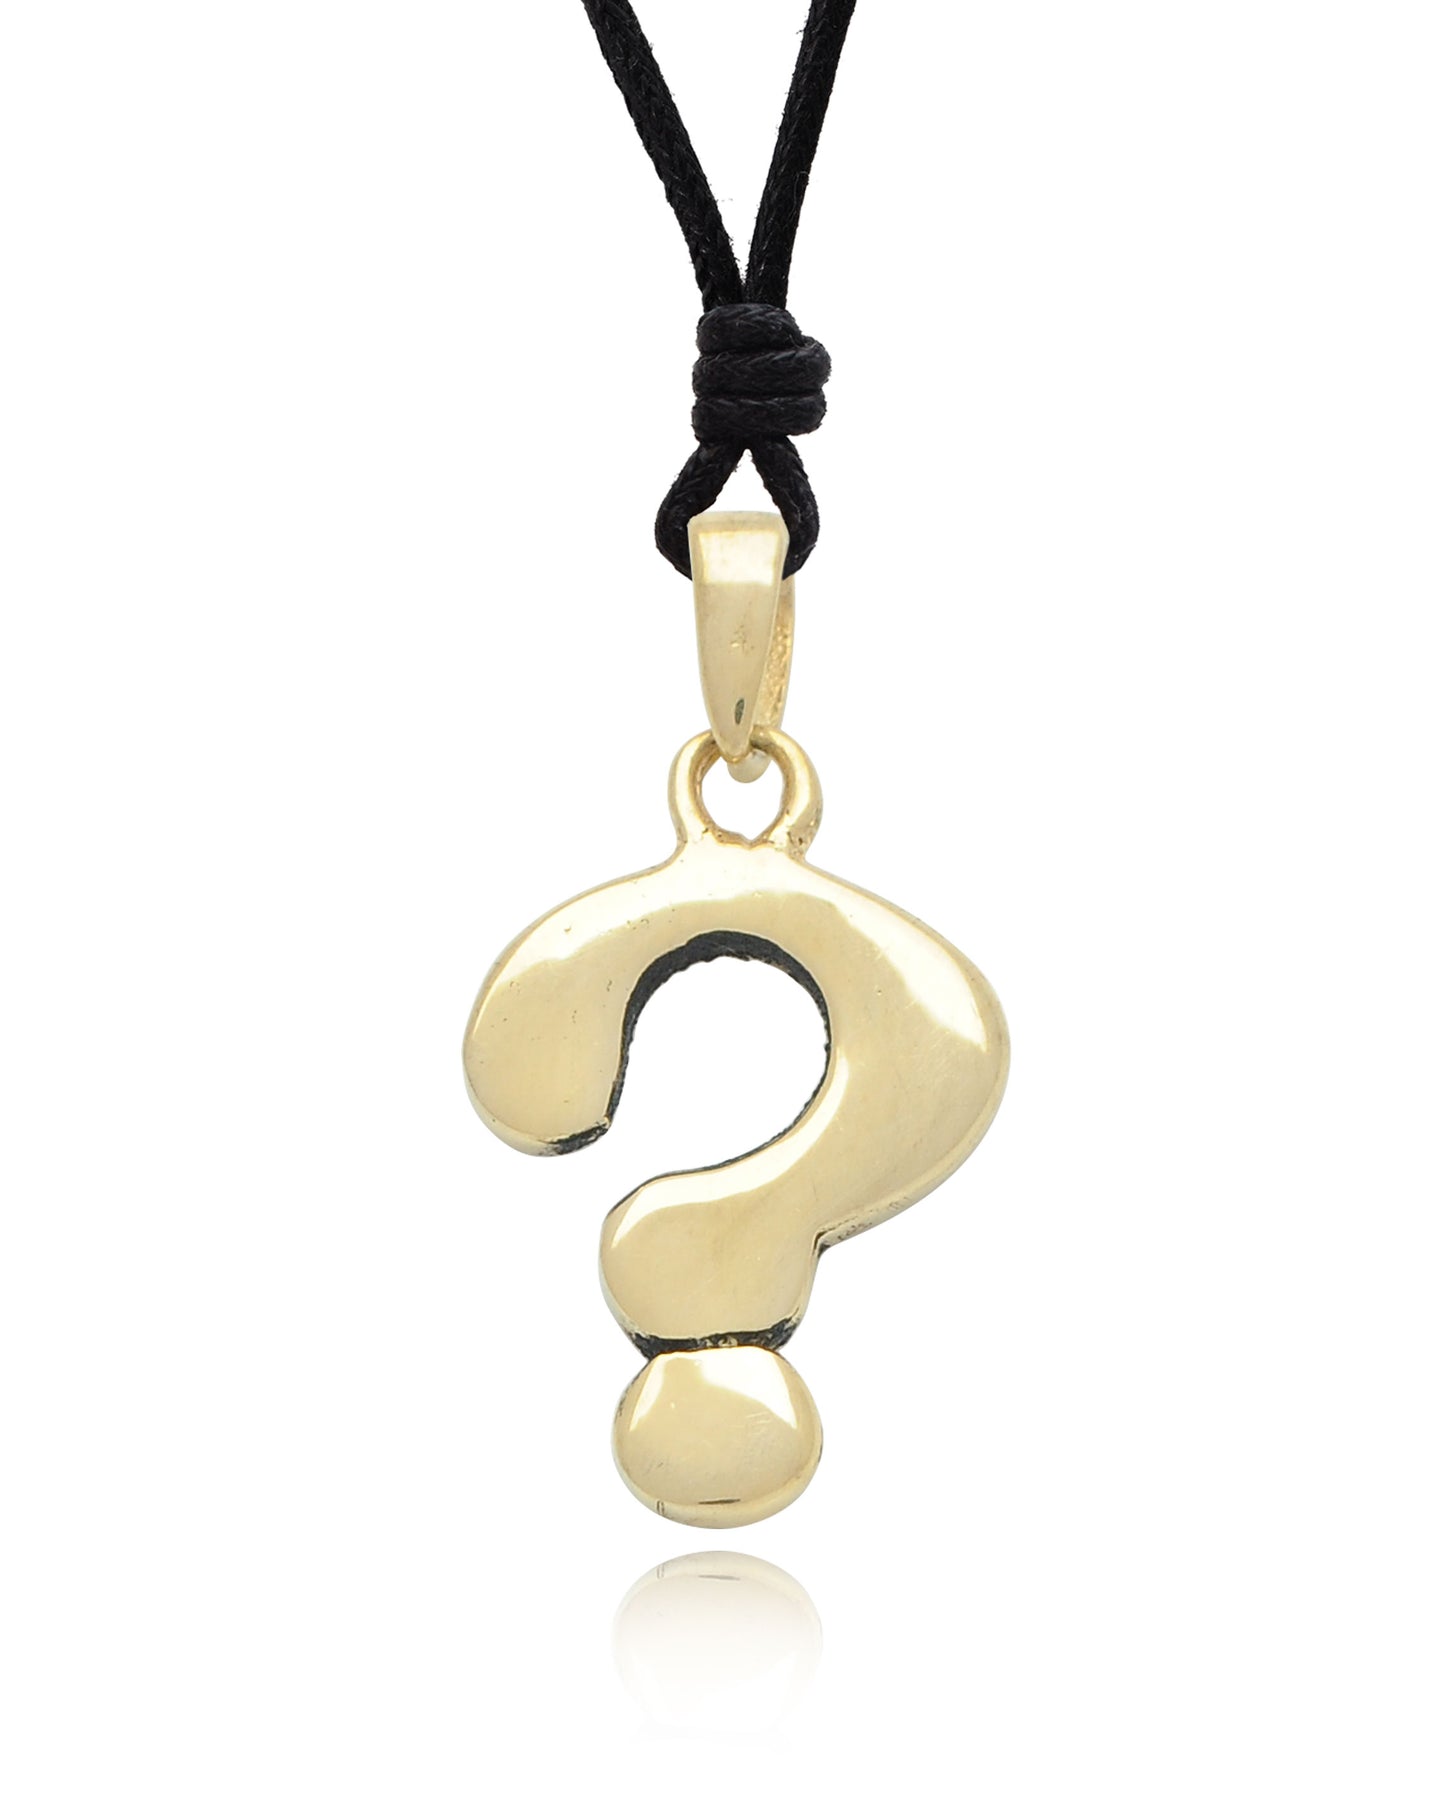 Question Mark 92.5 Sterling Silver Charm Necklace Pendant Jewelry